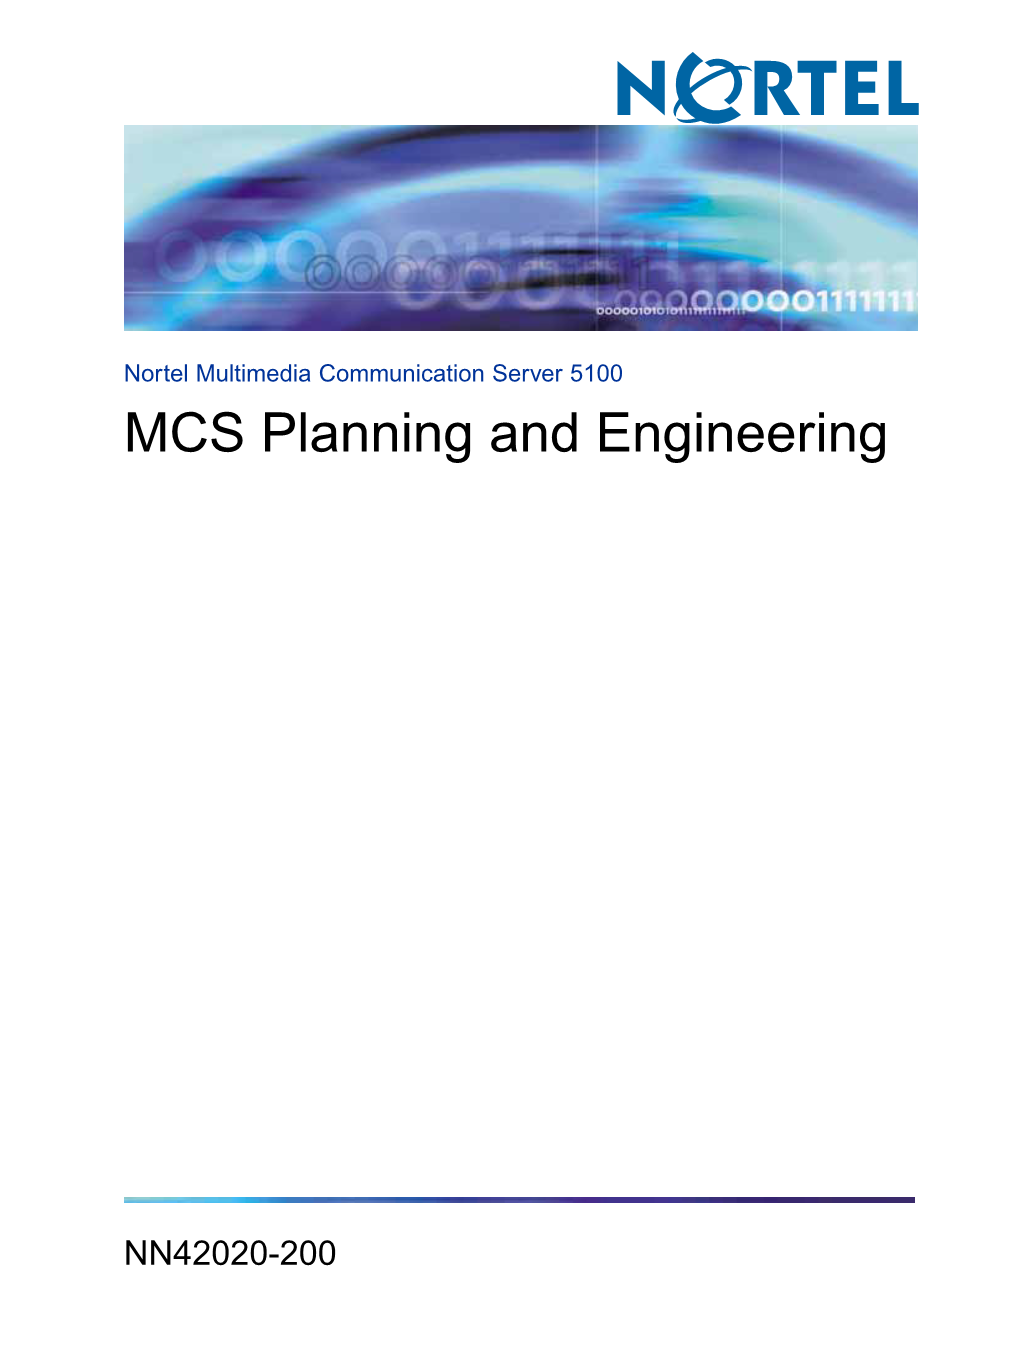 MCS Planning and Engineering